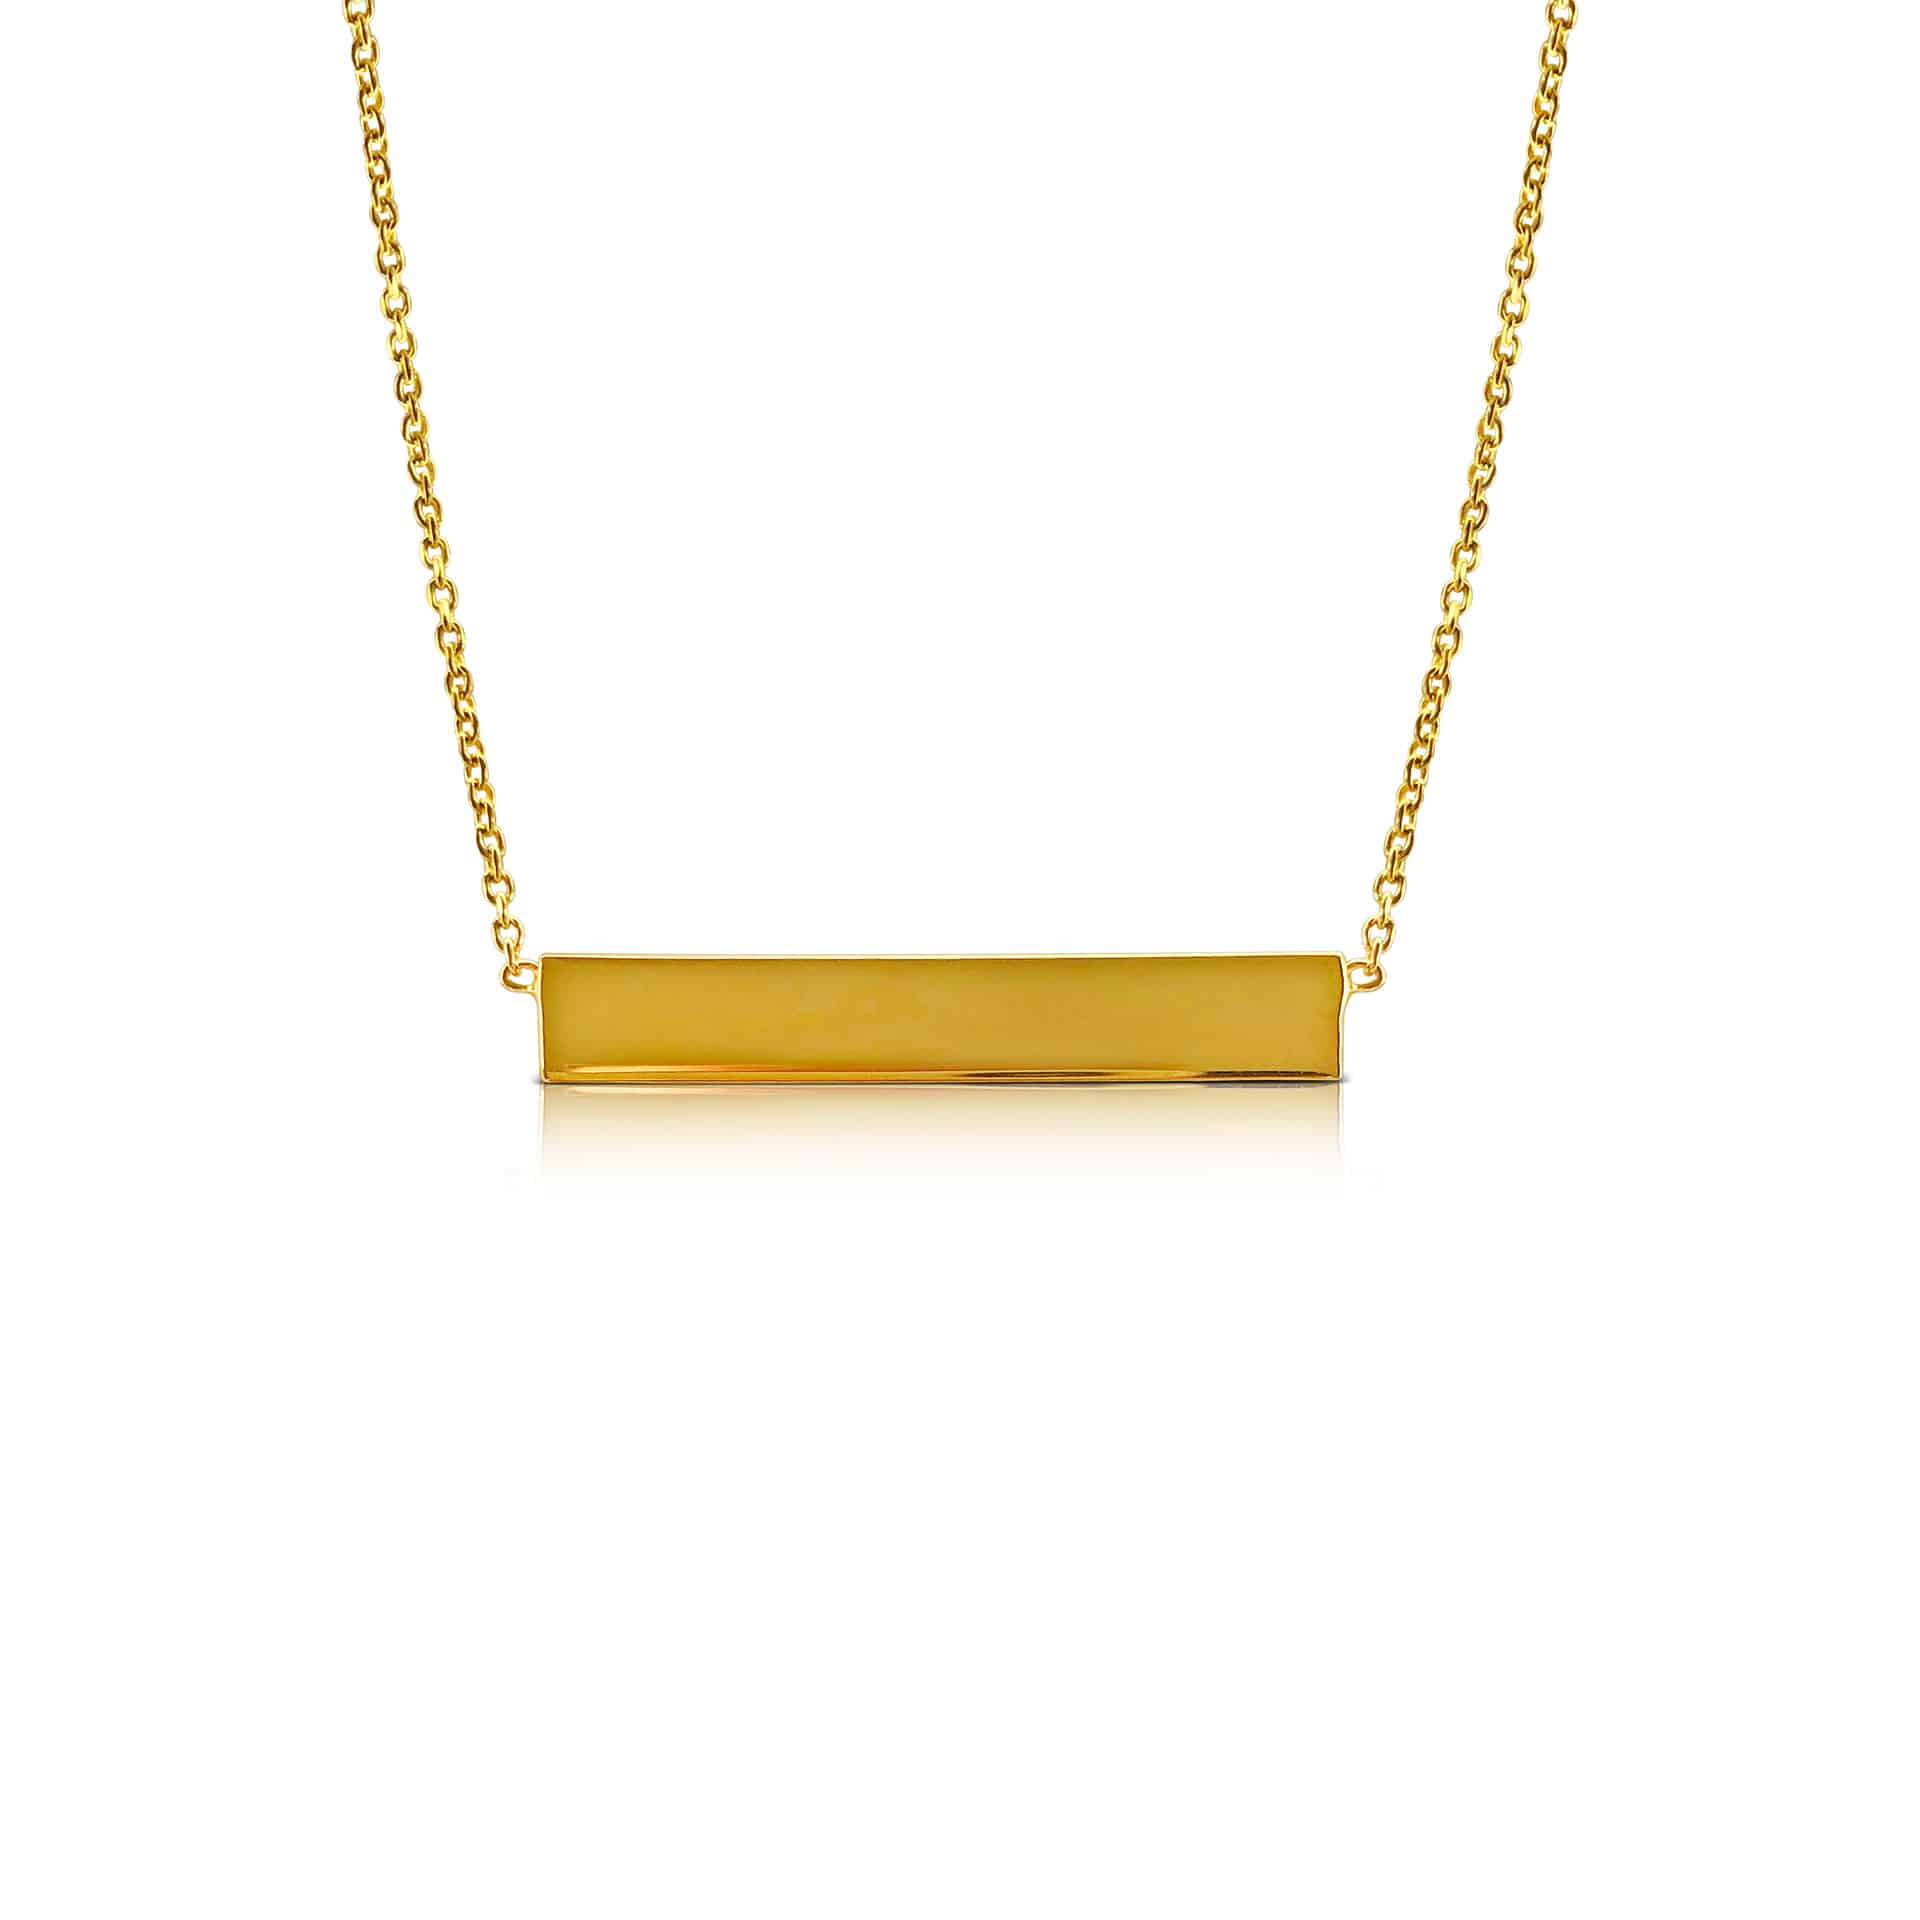 Ór Collection 18ct Gold Plated Bar Necklace